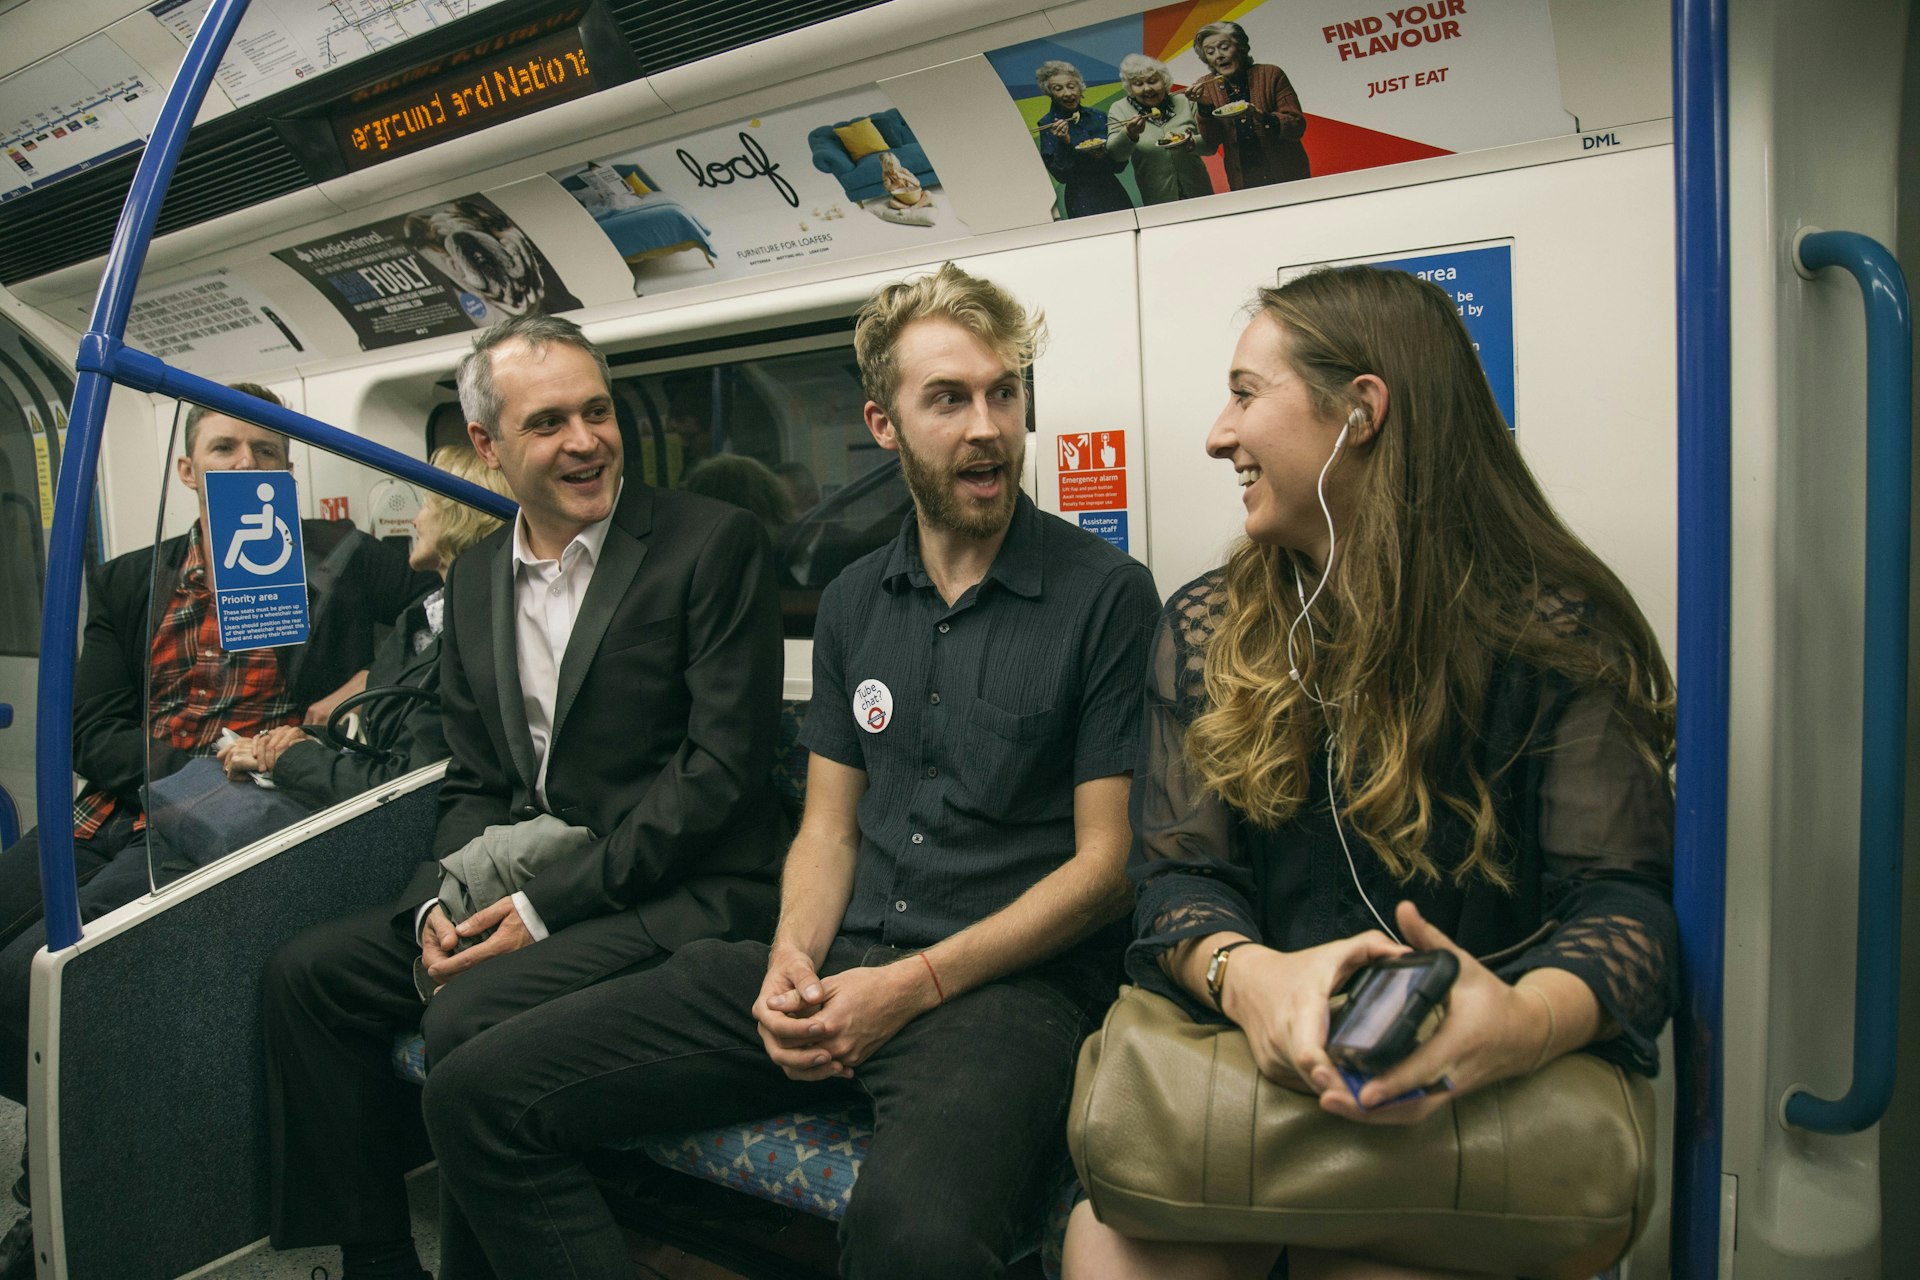 Do people really want to chat on the Tube?